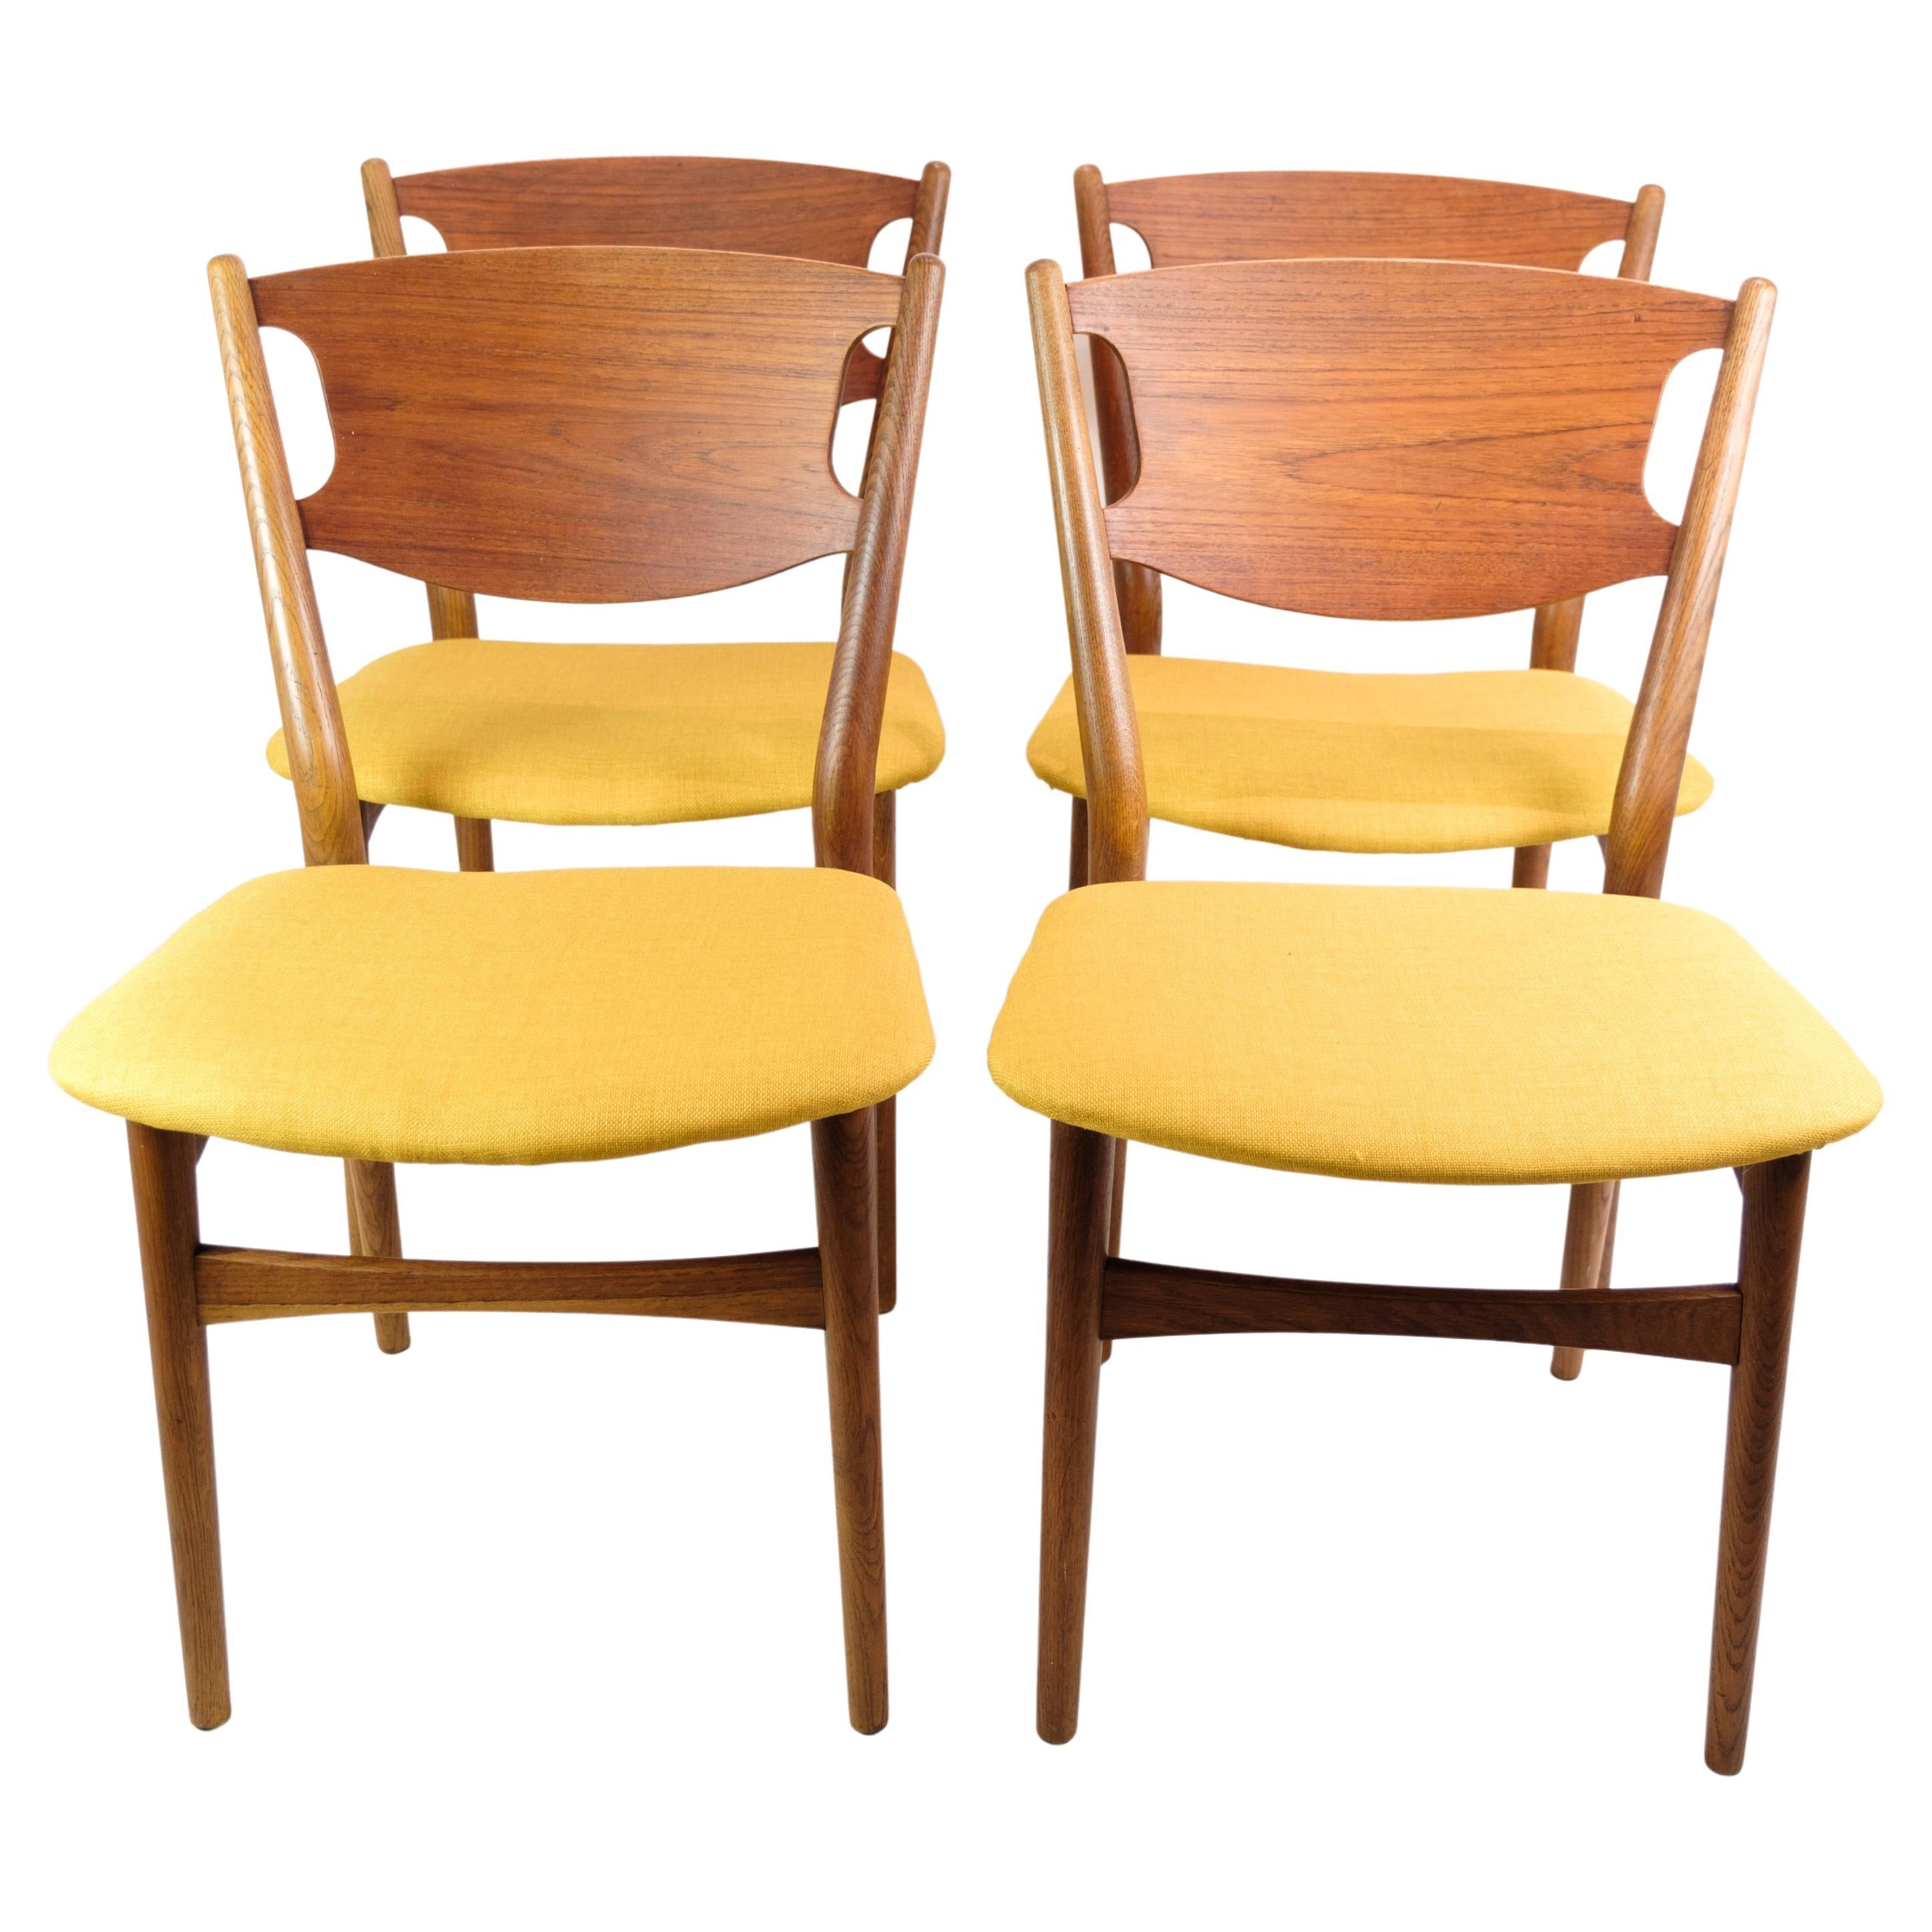 4 Dining Room Chairs, Danish Design, Teak Wood, Fabric Cover, 1960 For Sale